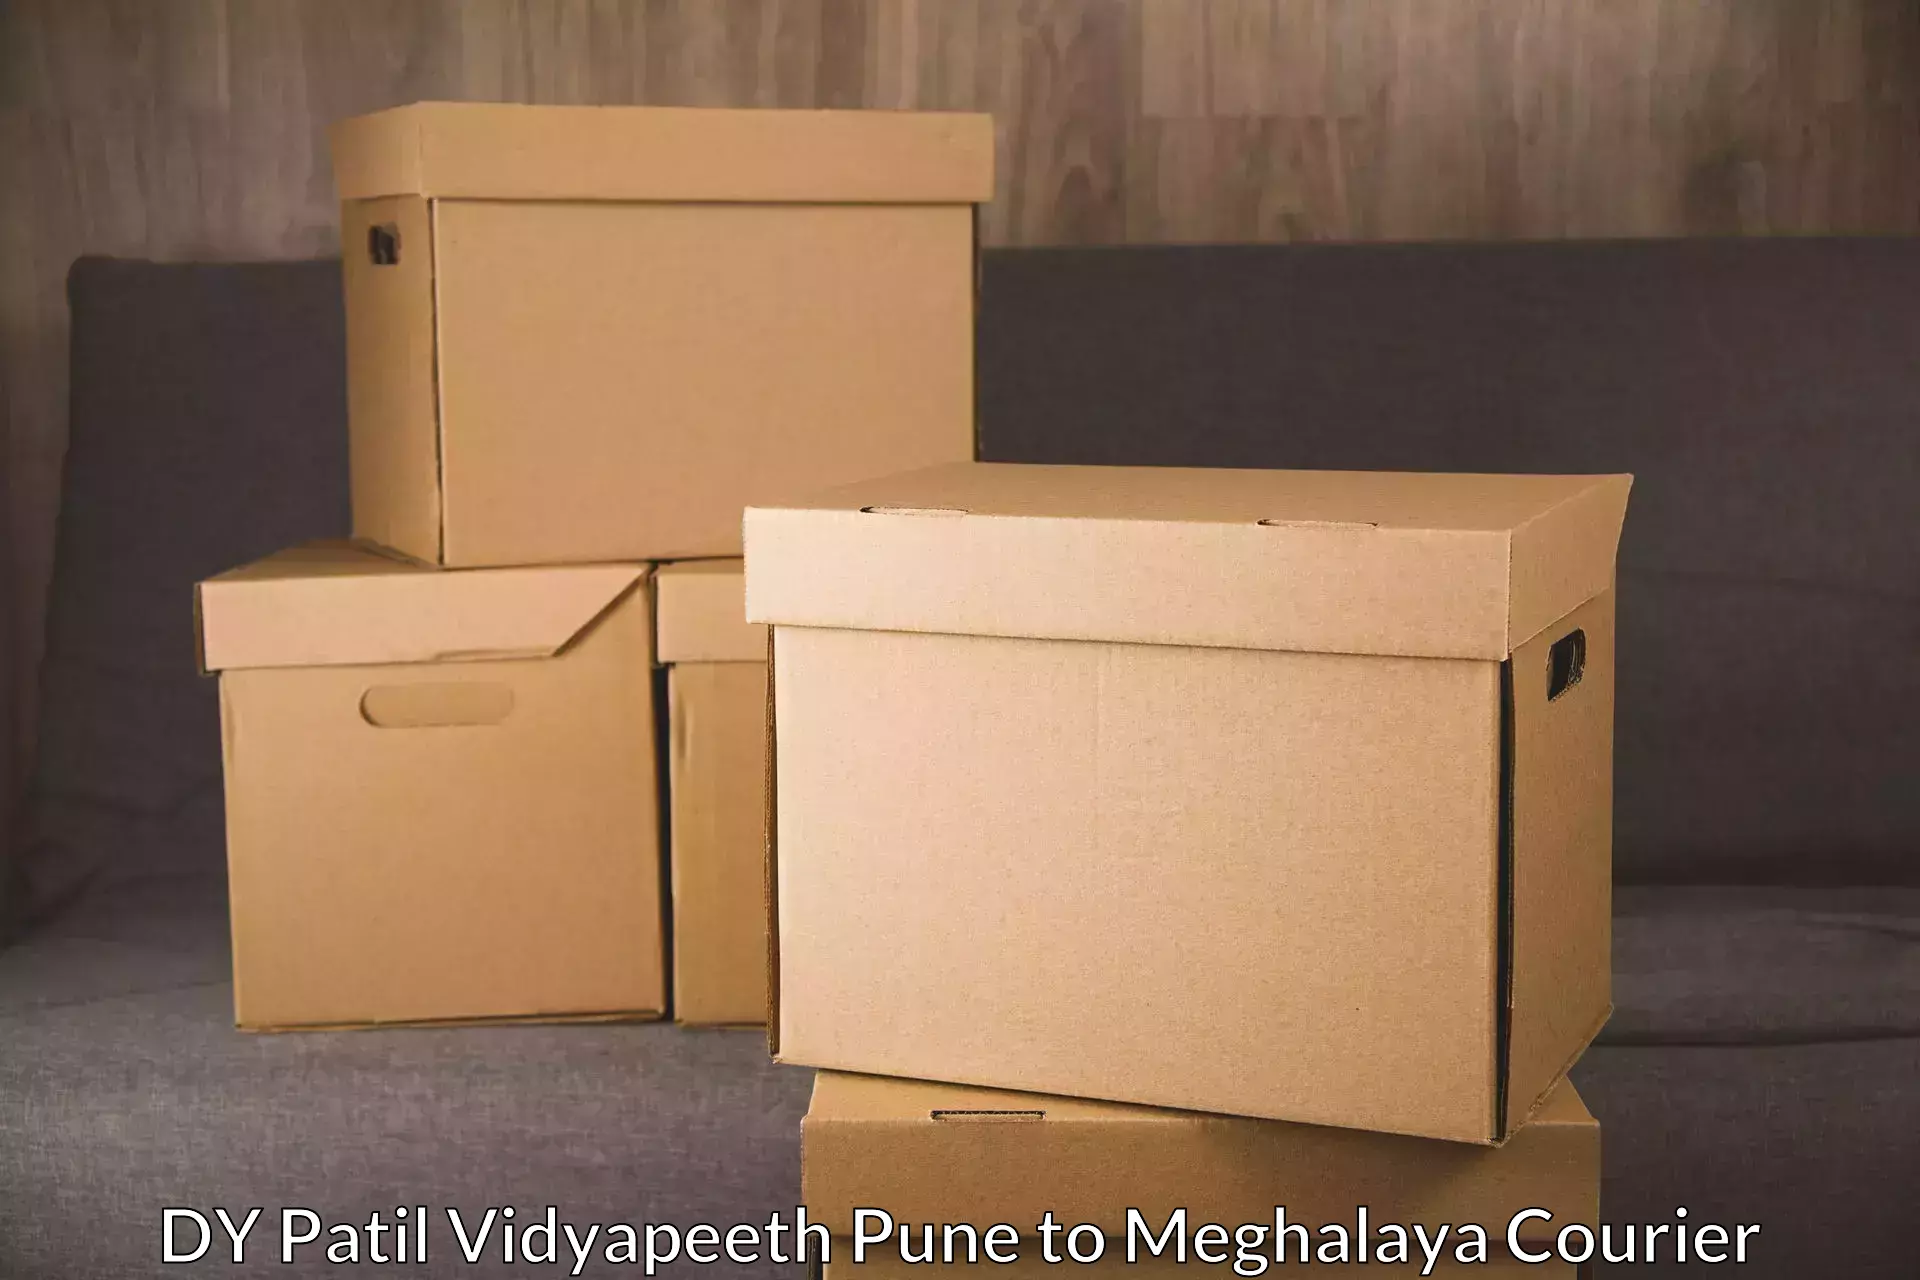 Quality courier services in DY Patil Vidyapeeth Pune to Meghalaya